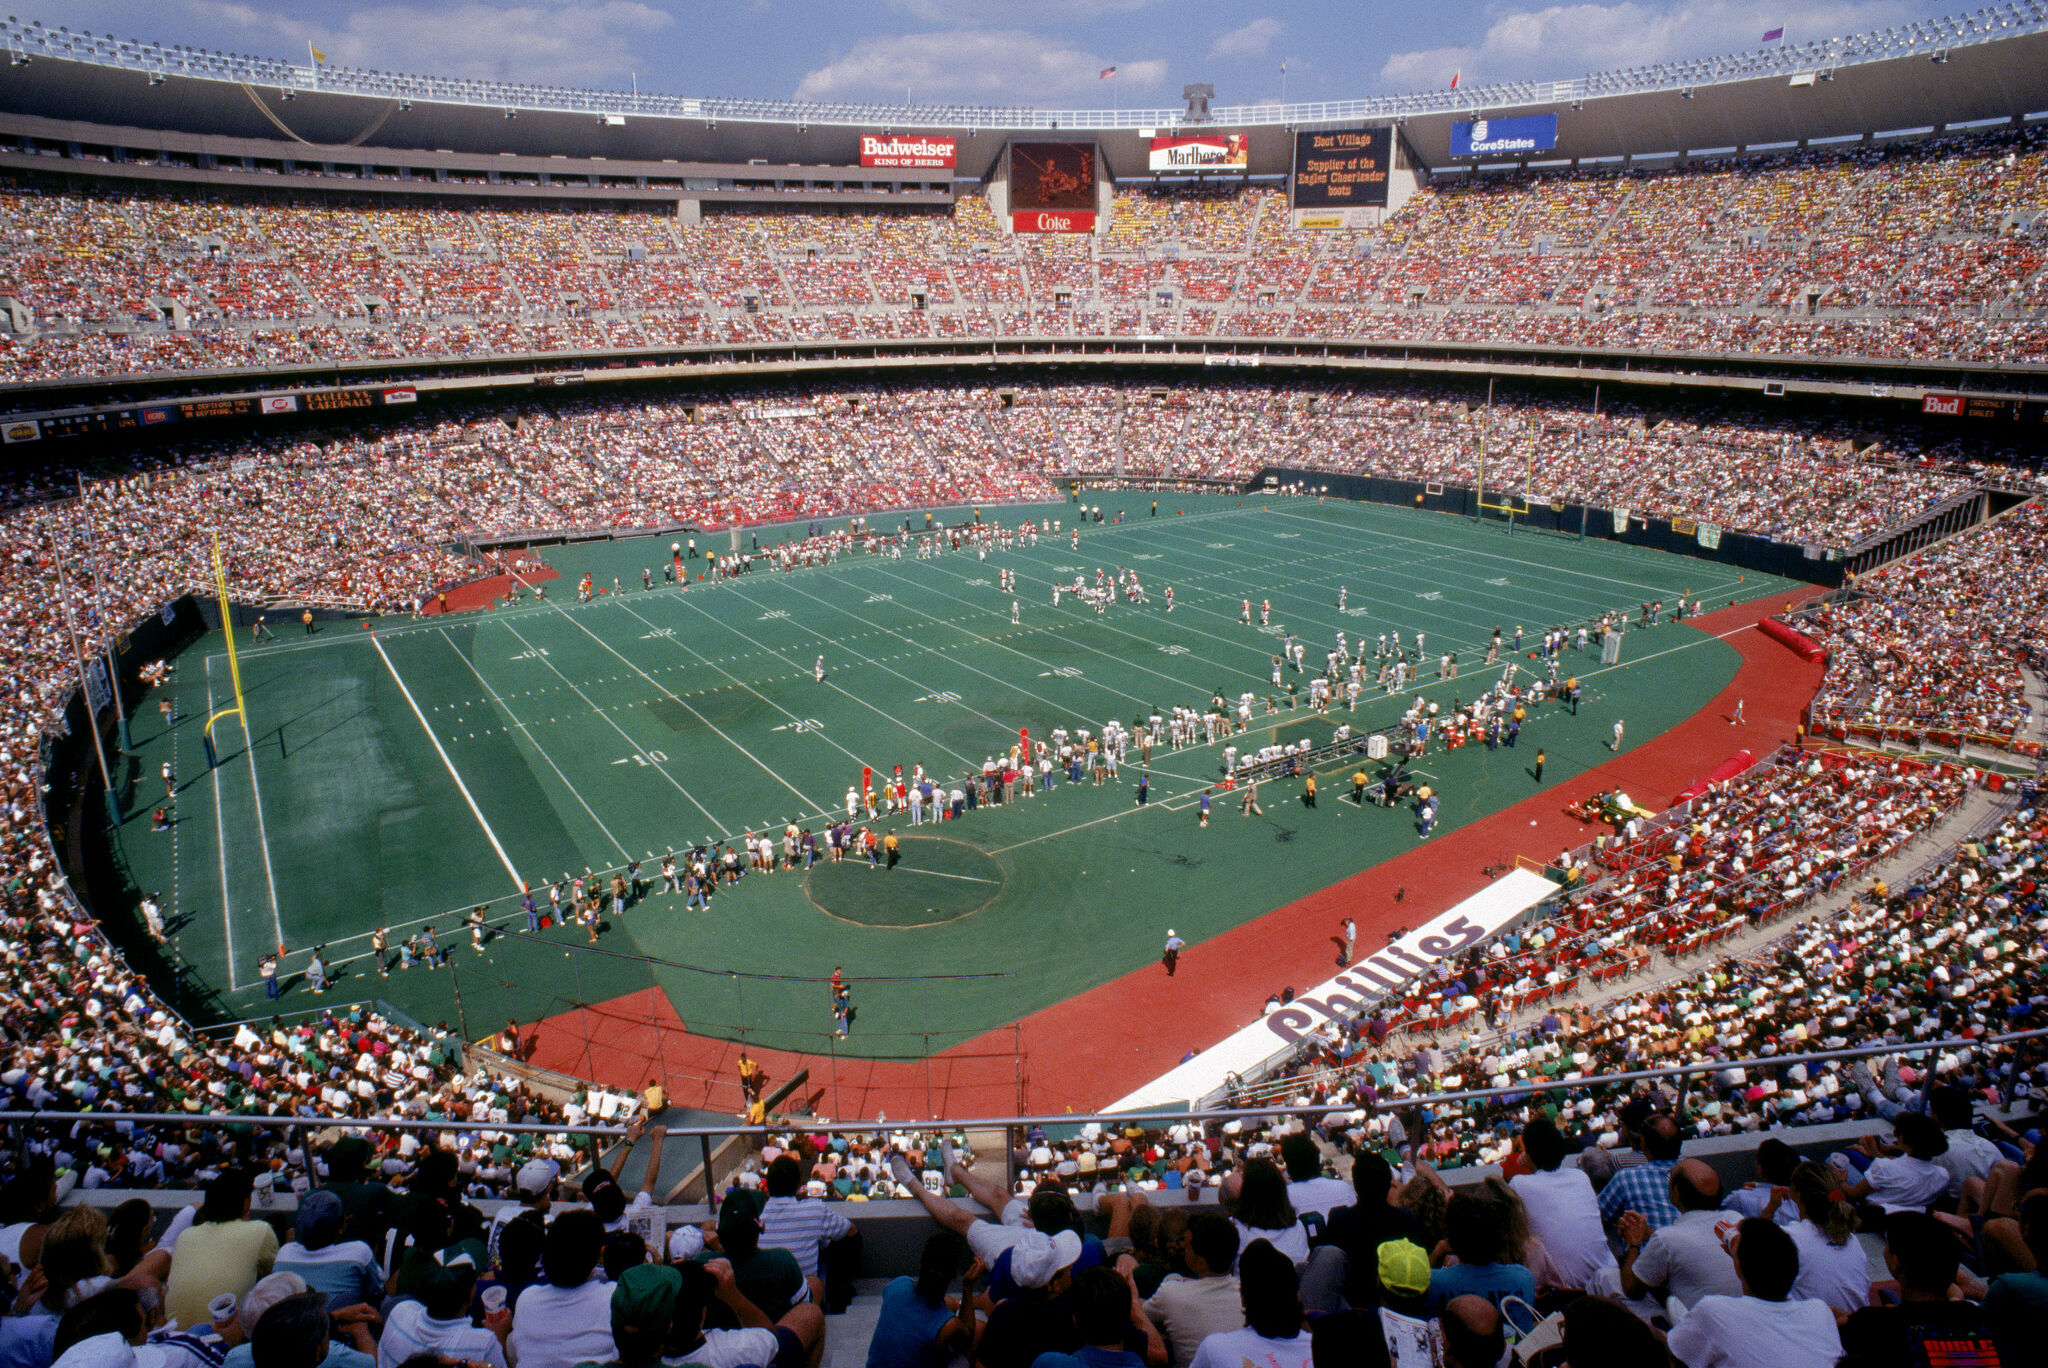 Did you know there was a jail in the Eagles stadium?